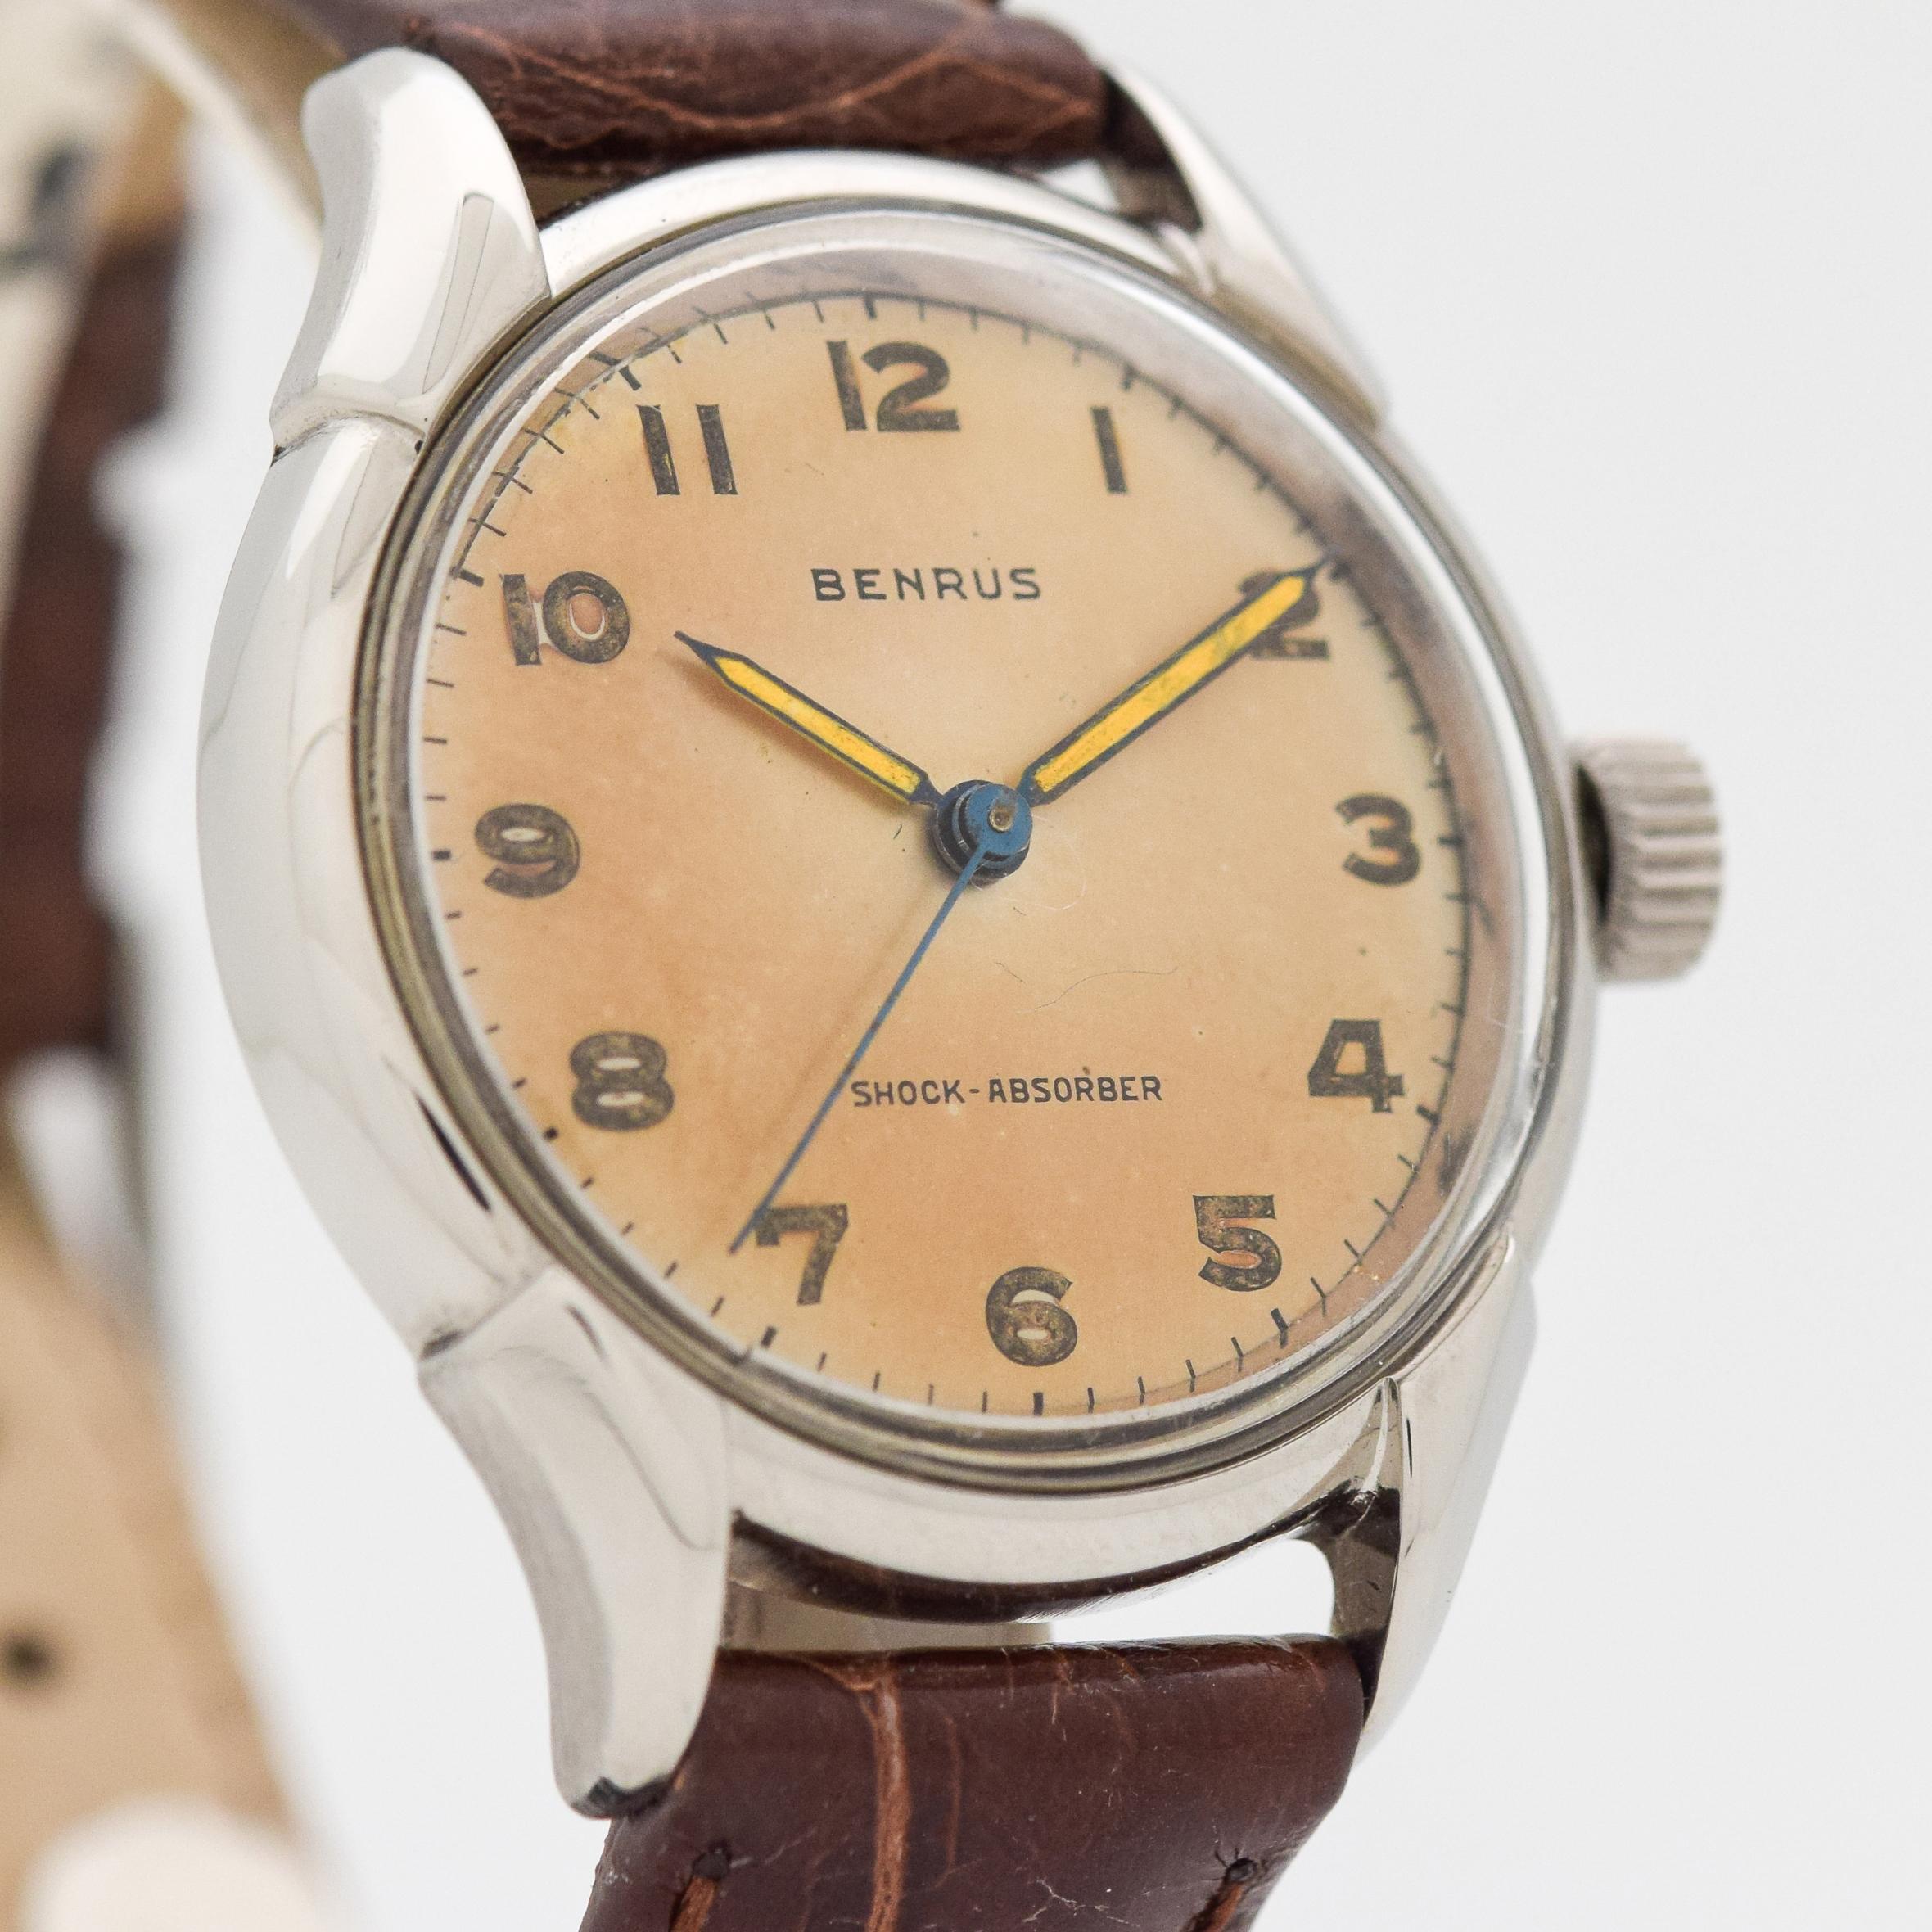 1950's - 1960's Vintage Benrus Stainless Steel watch with Original Patina Silver (Turned Brown) Dial with Arabic Numbers. 32mm x 38mm lug to lug (1.26 in. x 1.5 in.) - 15 jewel, manual caliber movement. Equipped with a 100% Genuine Alligator Glossy